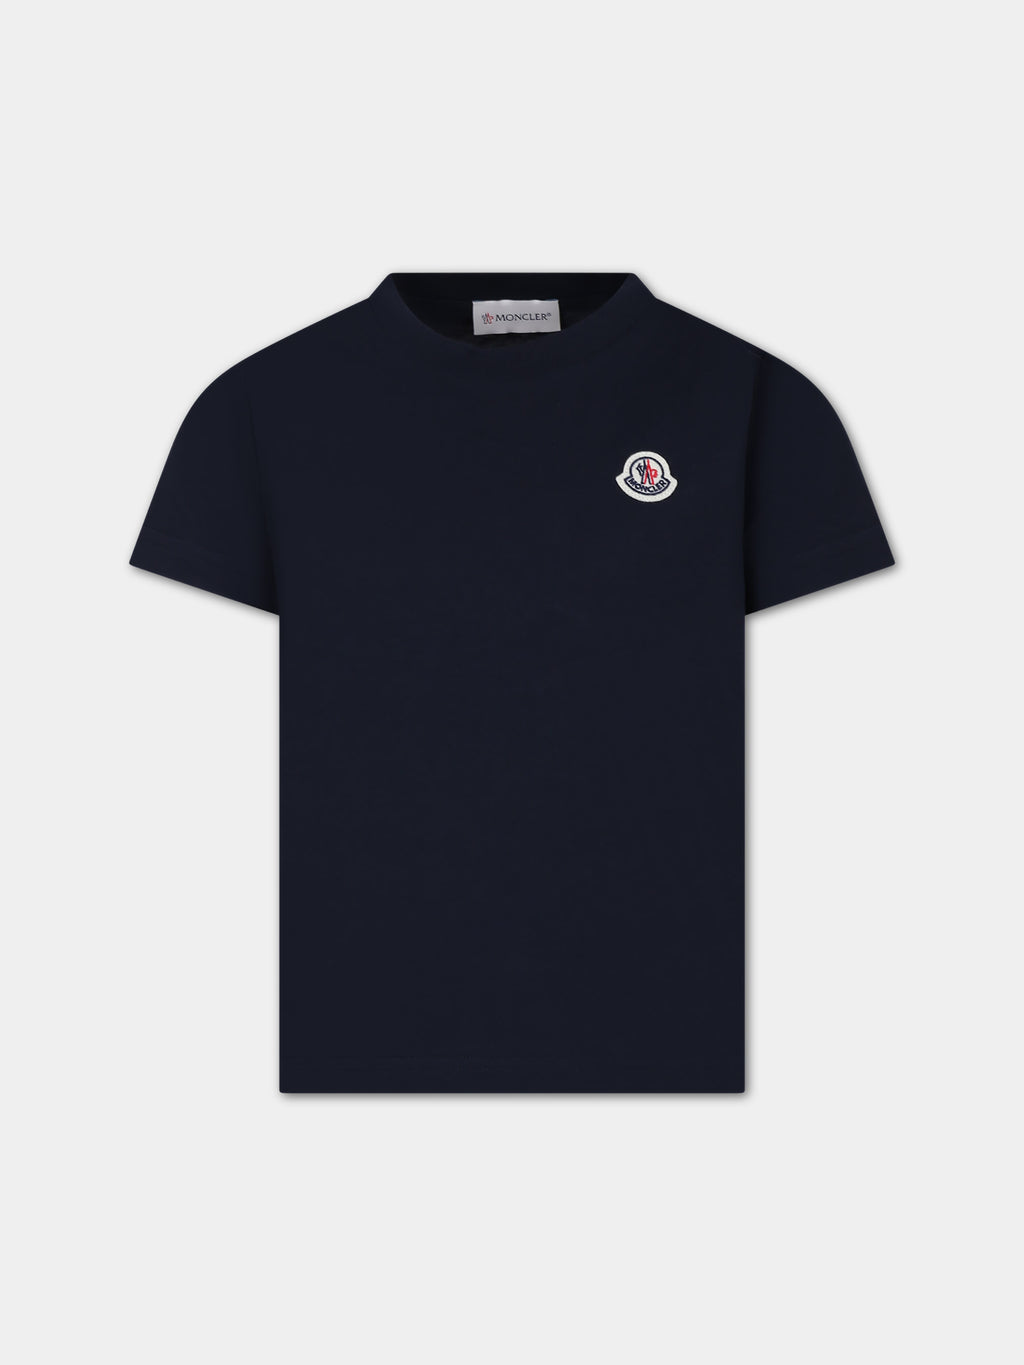 Blue t-shirt for kids with logo